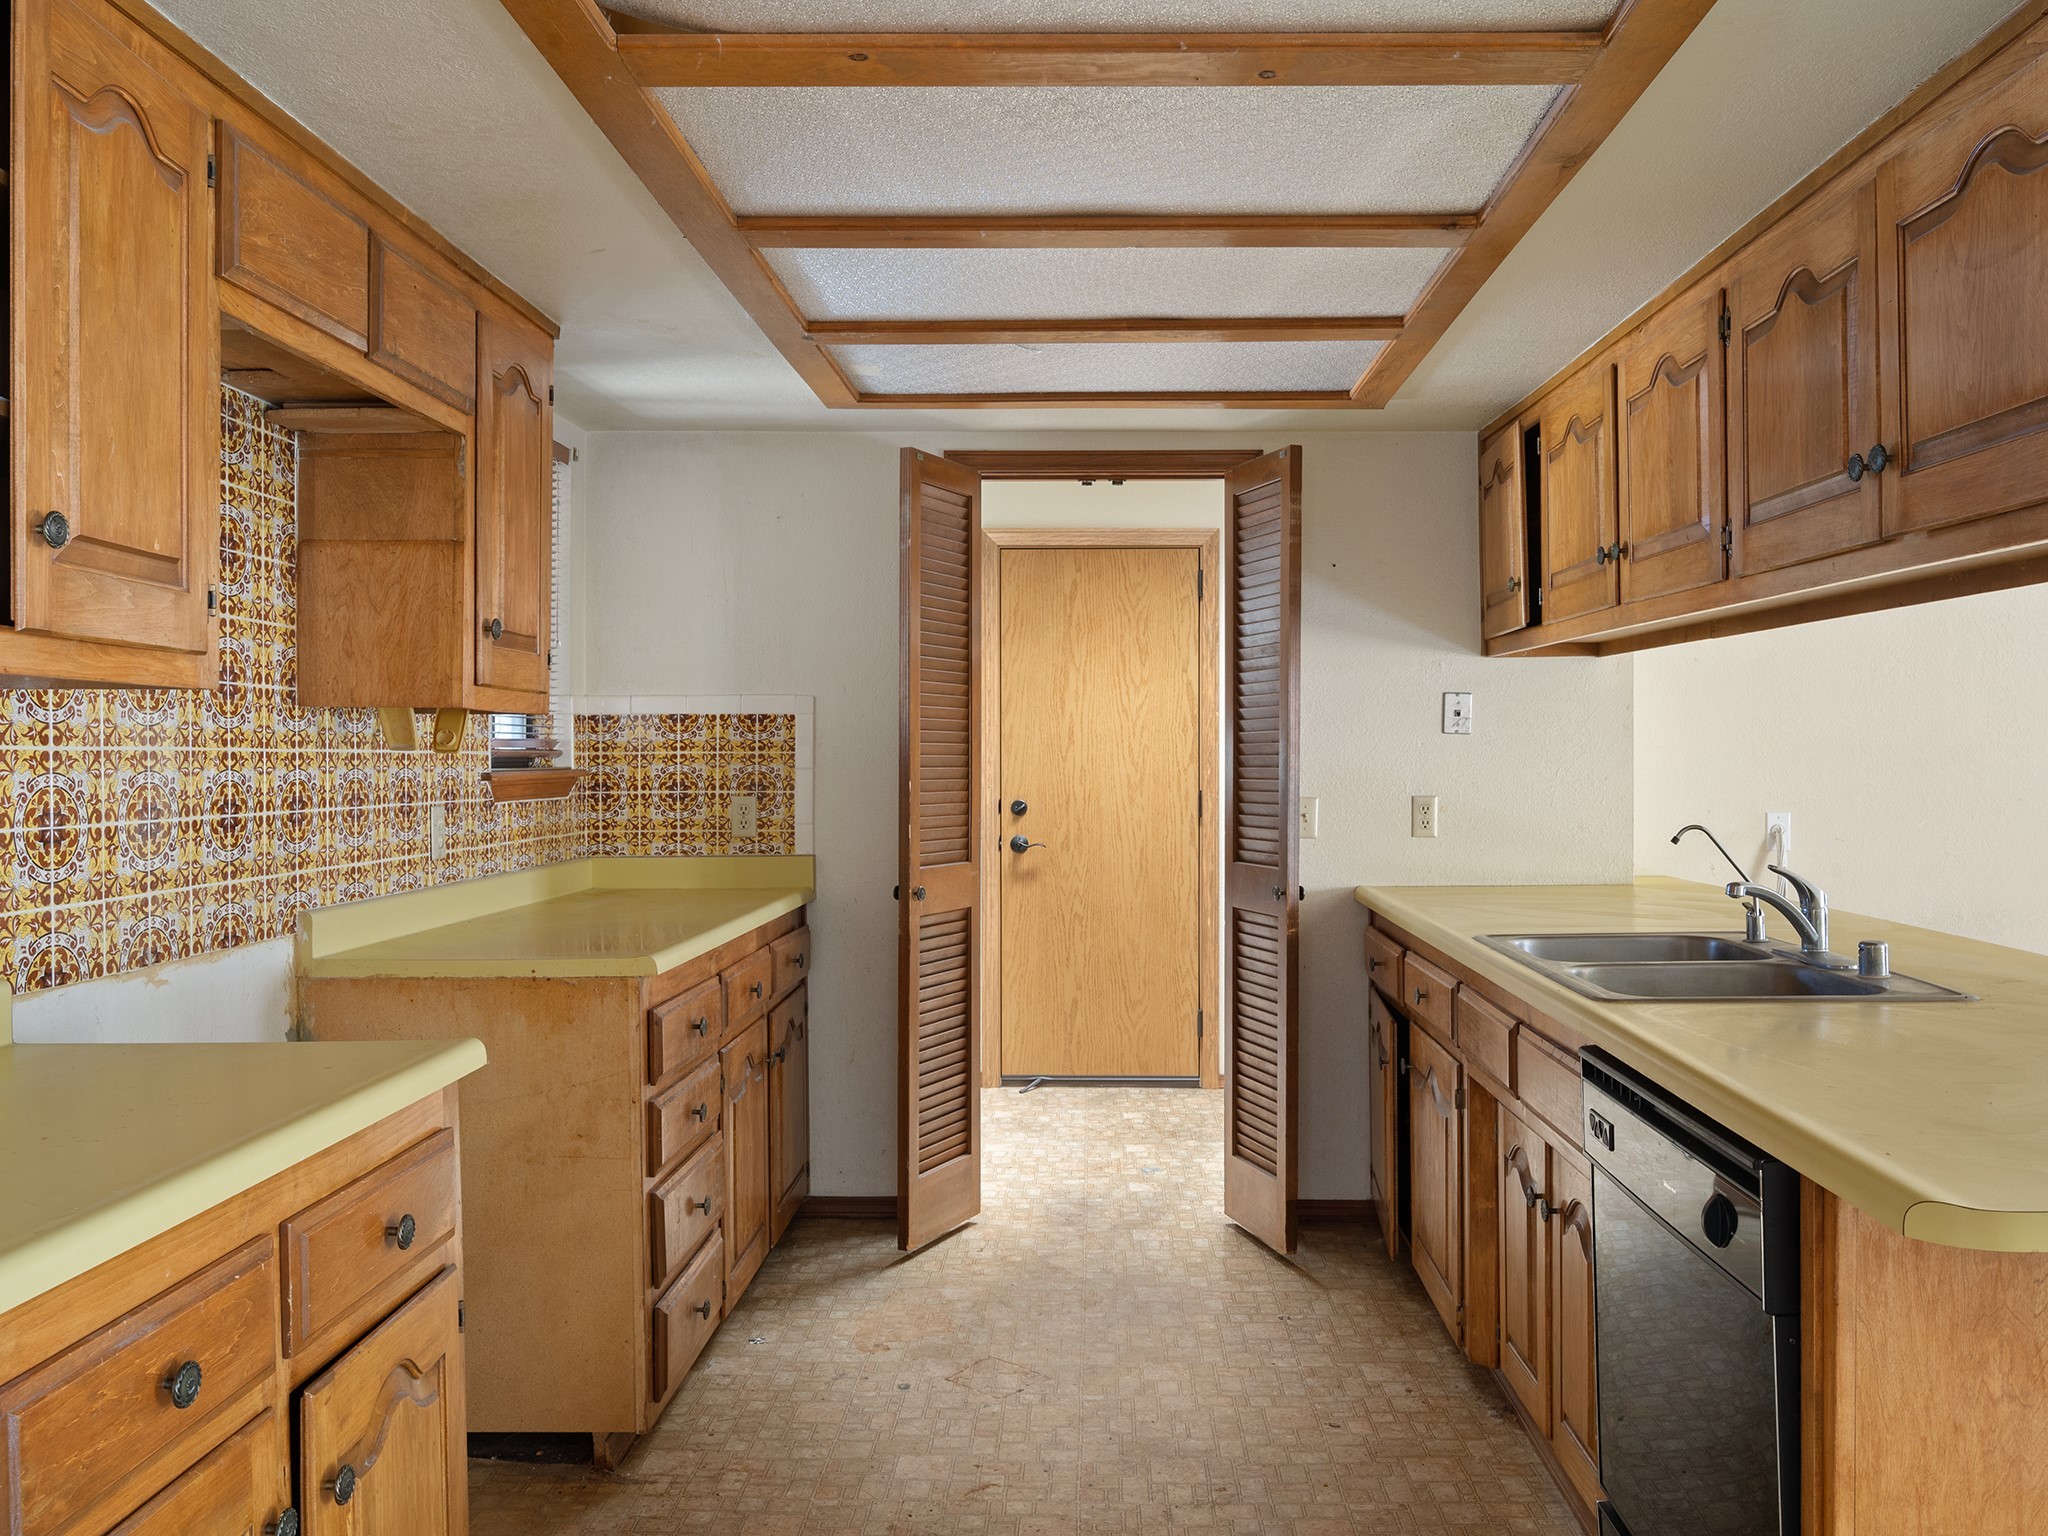 447 Grand Canyon Drive, White Rock, New Mexico 87547, 3 Bedrooms Bedrooms, ,2 BathroomsBathrooms,Residential,For Sale,447 Grand Canyon Drive,202233591